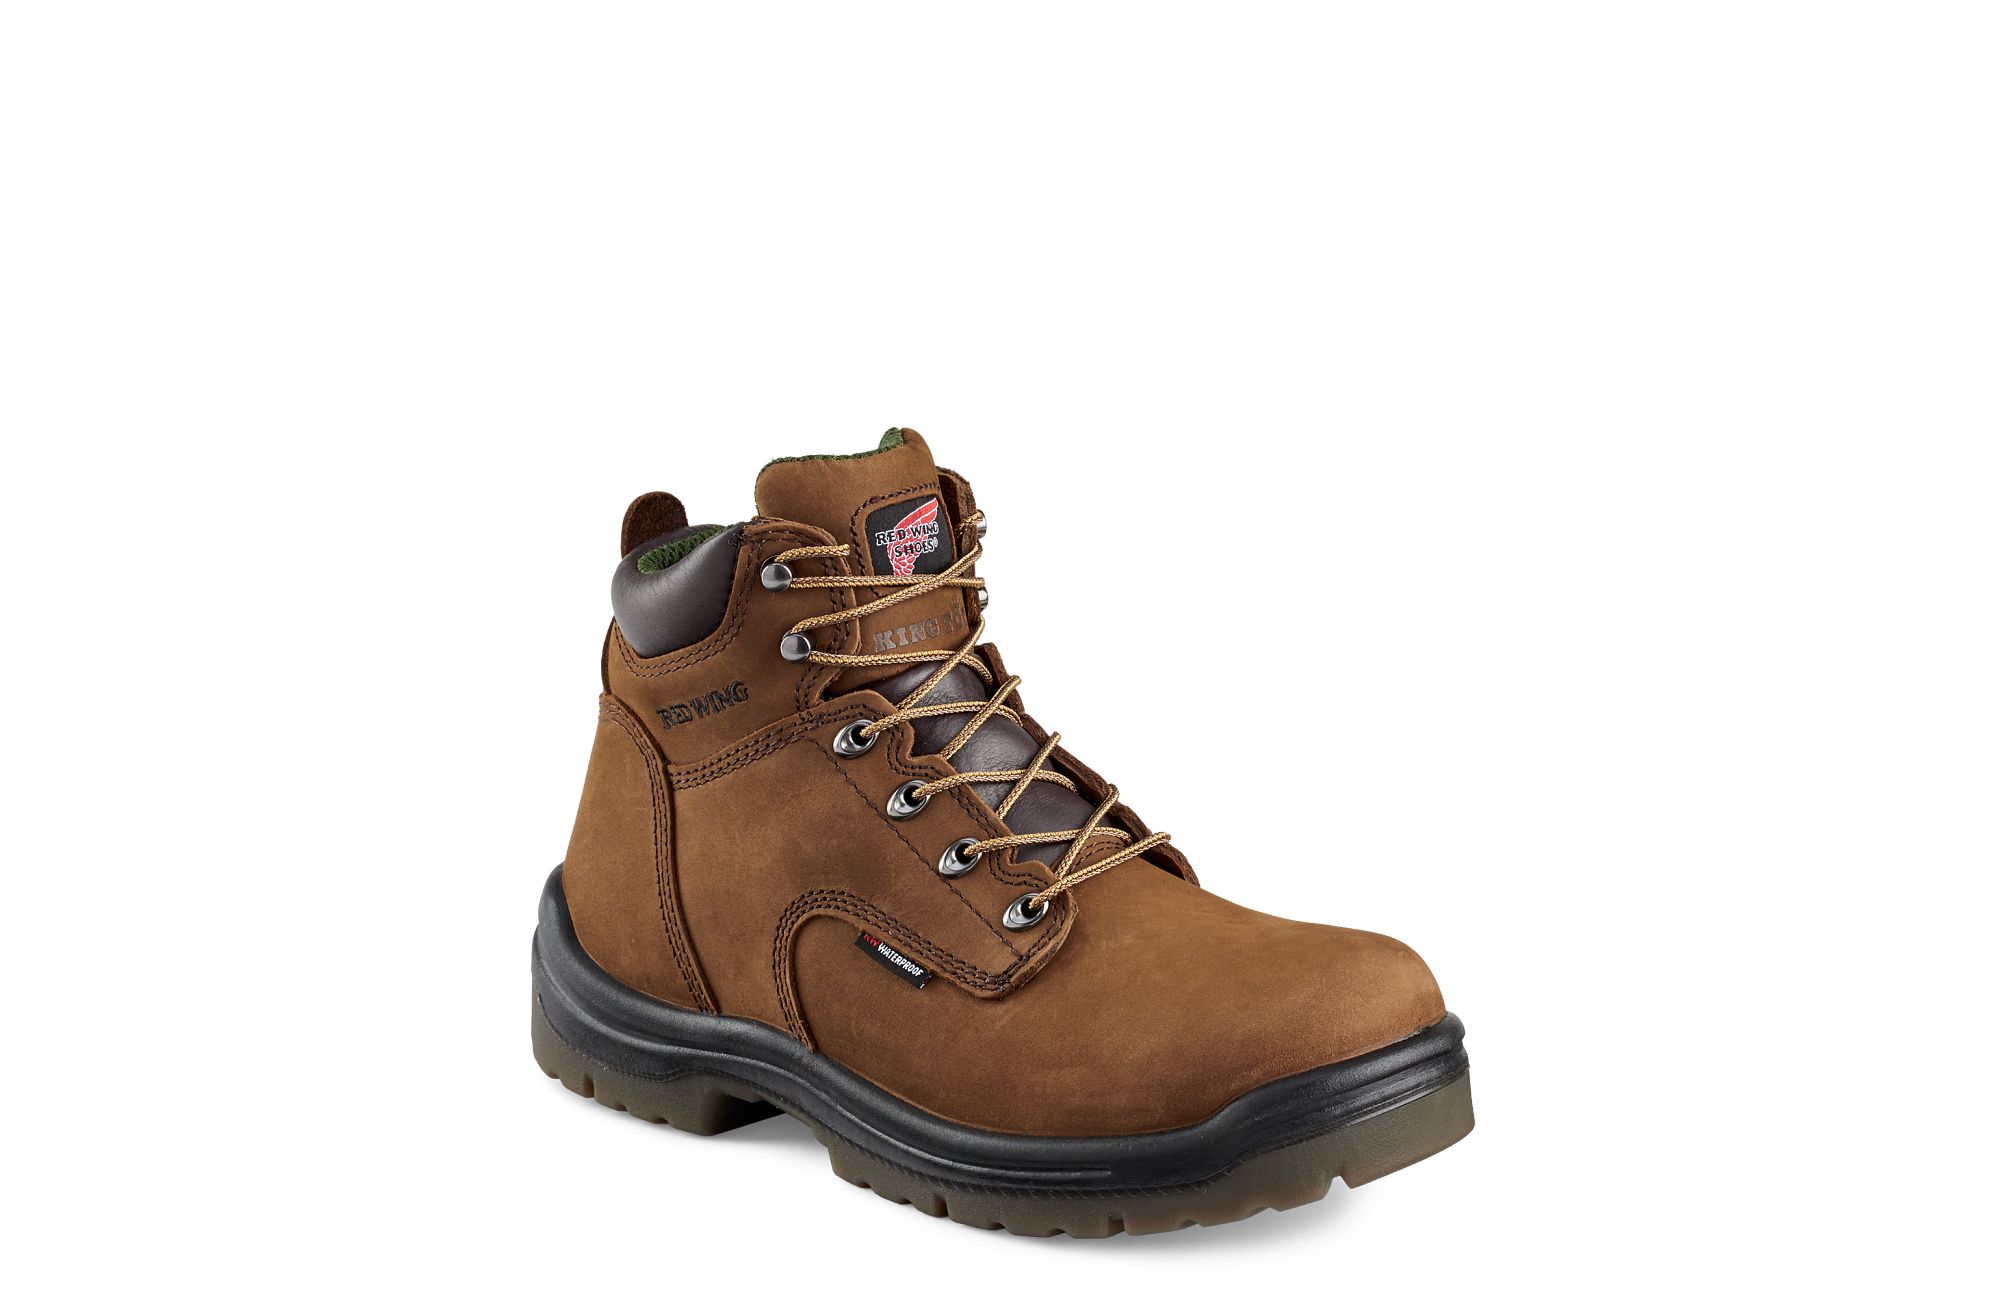 Red Wing Shoes, Shoes, New Womens 5 Red Wing Safety Work Boots Waterproof  King Toe Size 85